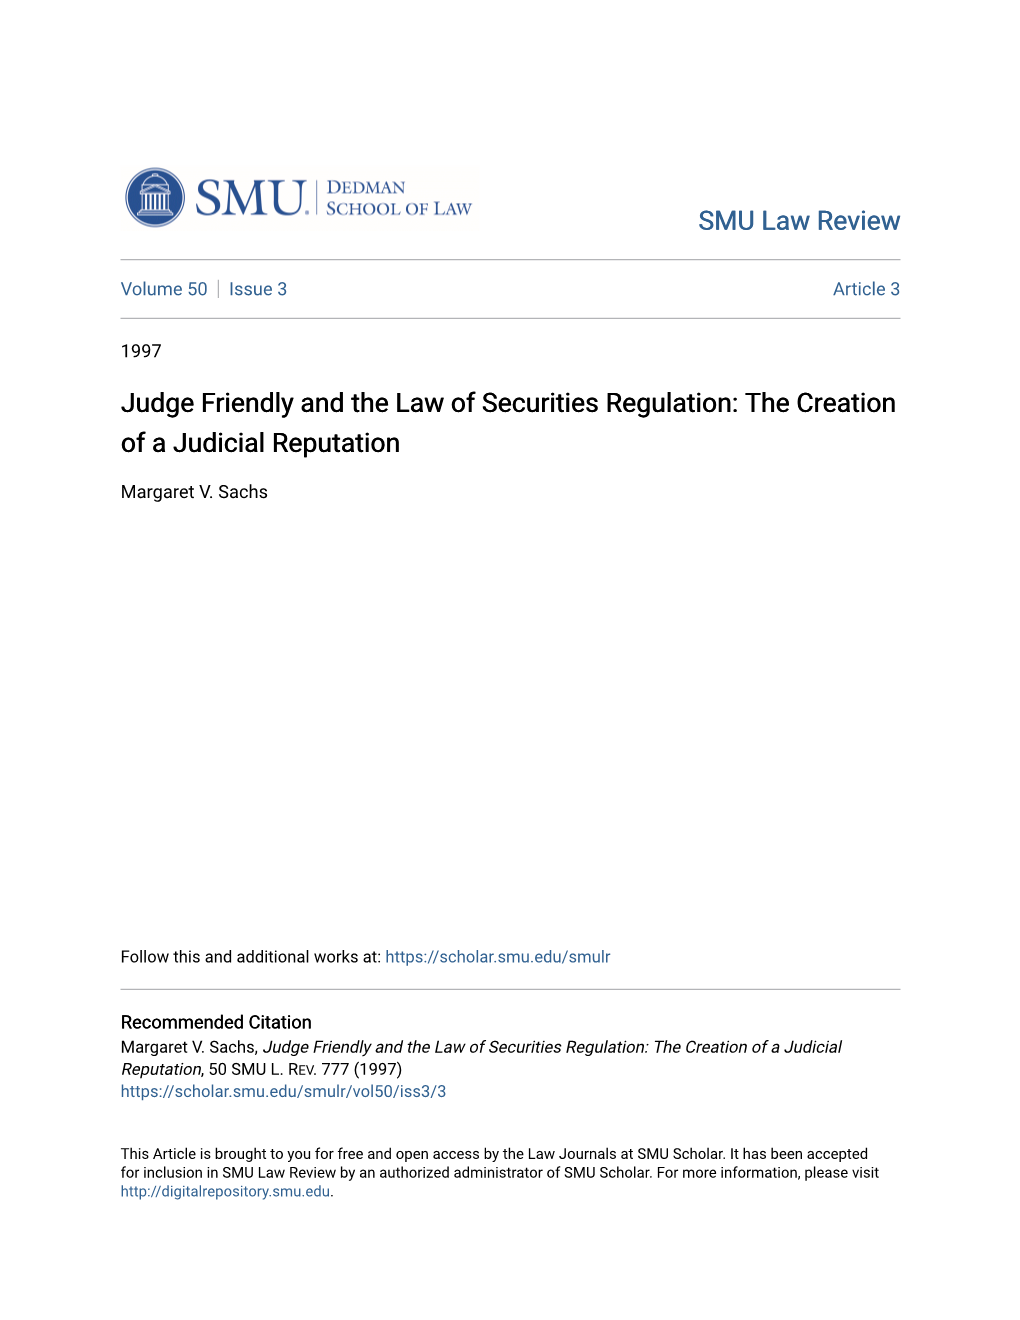 Judge Friendly and the Law of Securities Regulation: the Creation of a Judicial Reputation